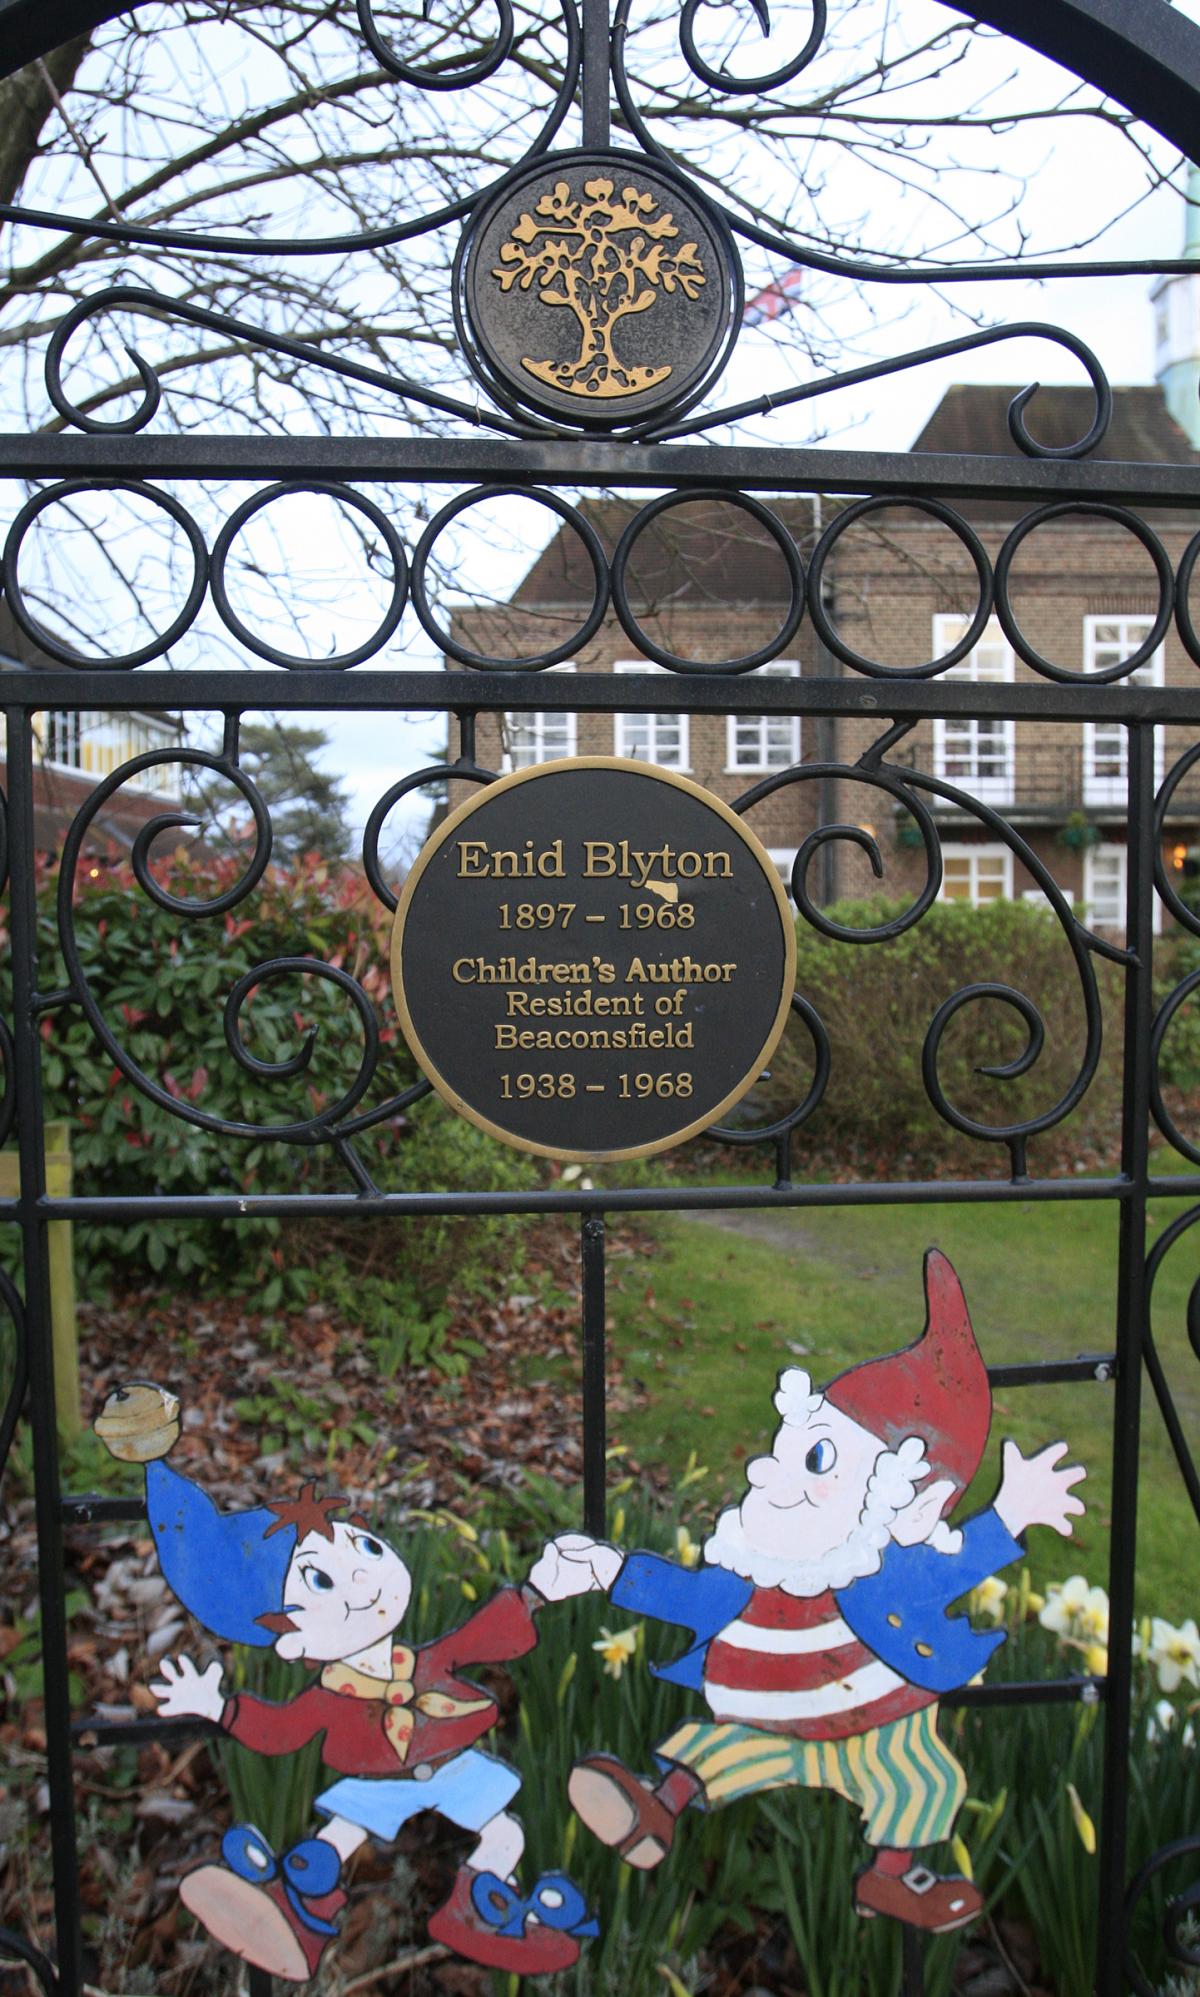 Enid Blyton plaque – A more fitting sight in the same gardens, the plaque was installed in 2014. Blyton lived and wrote the majority of her world-famous books in the town.